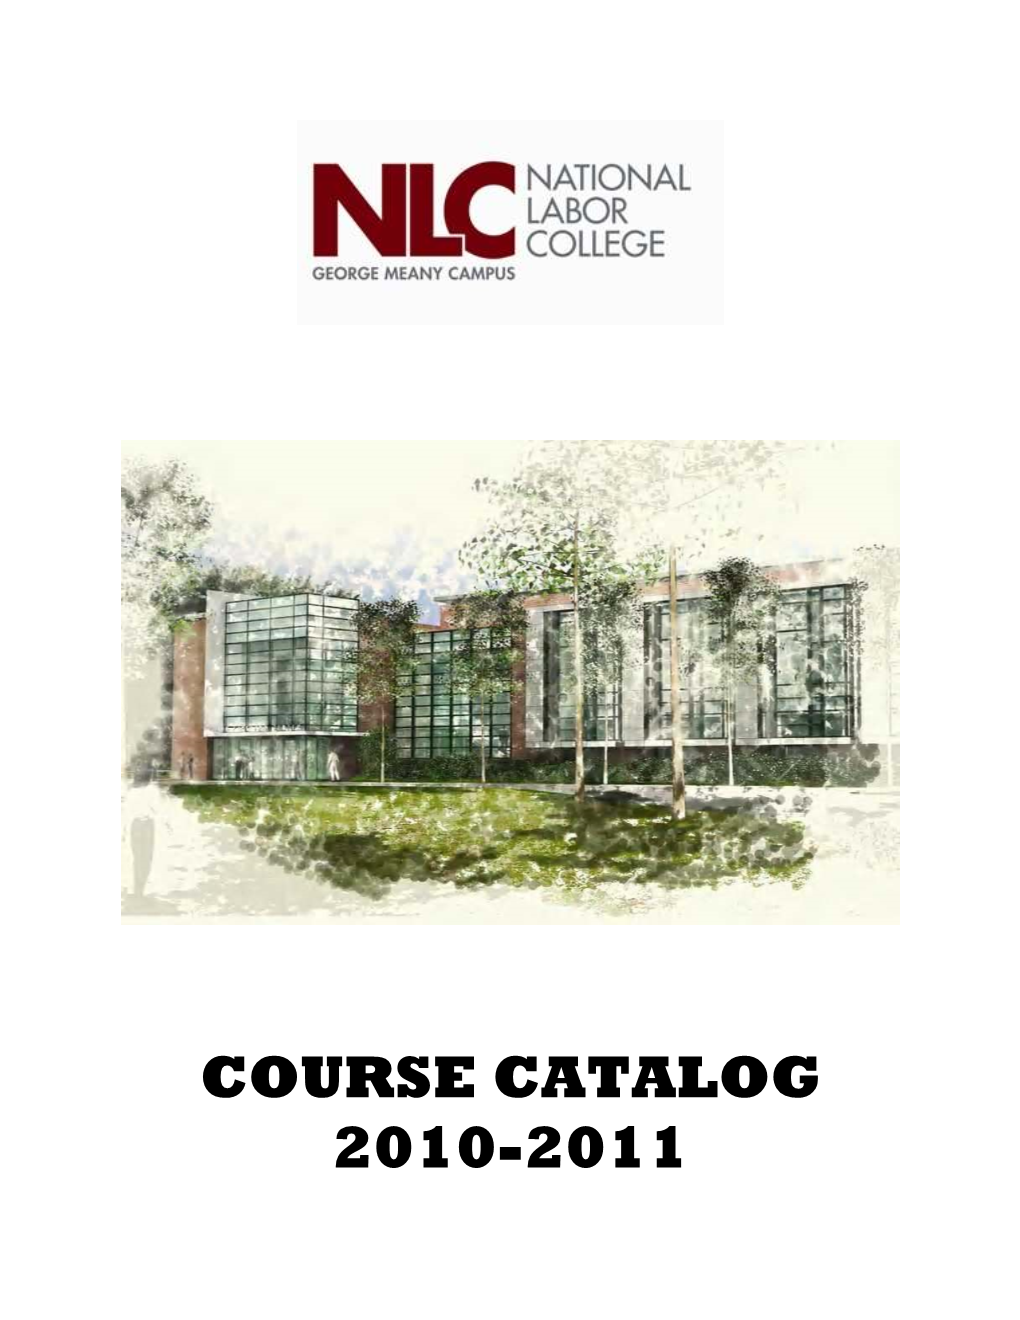 Course Catalog 2010-2011 Table of Contents